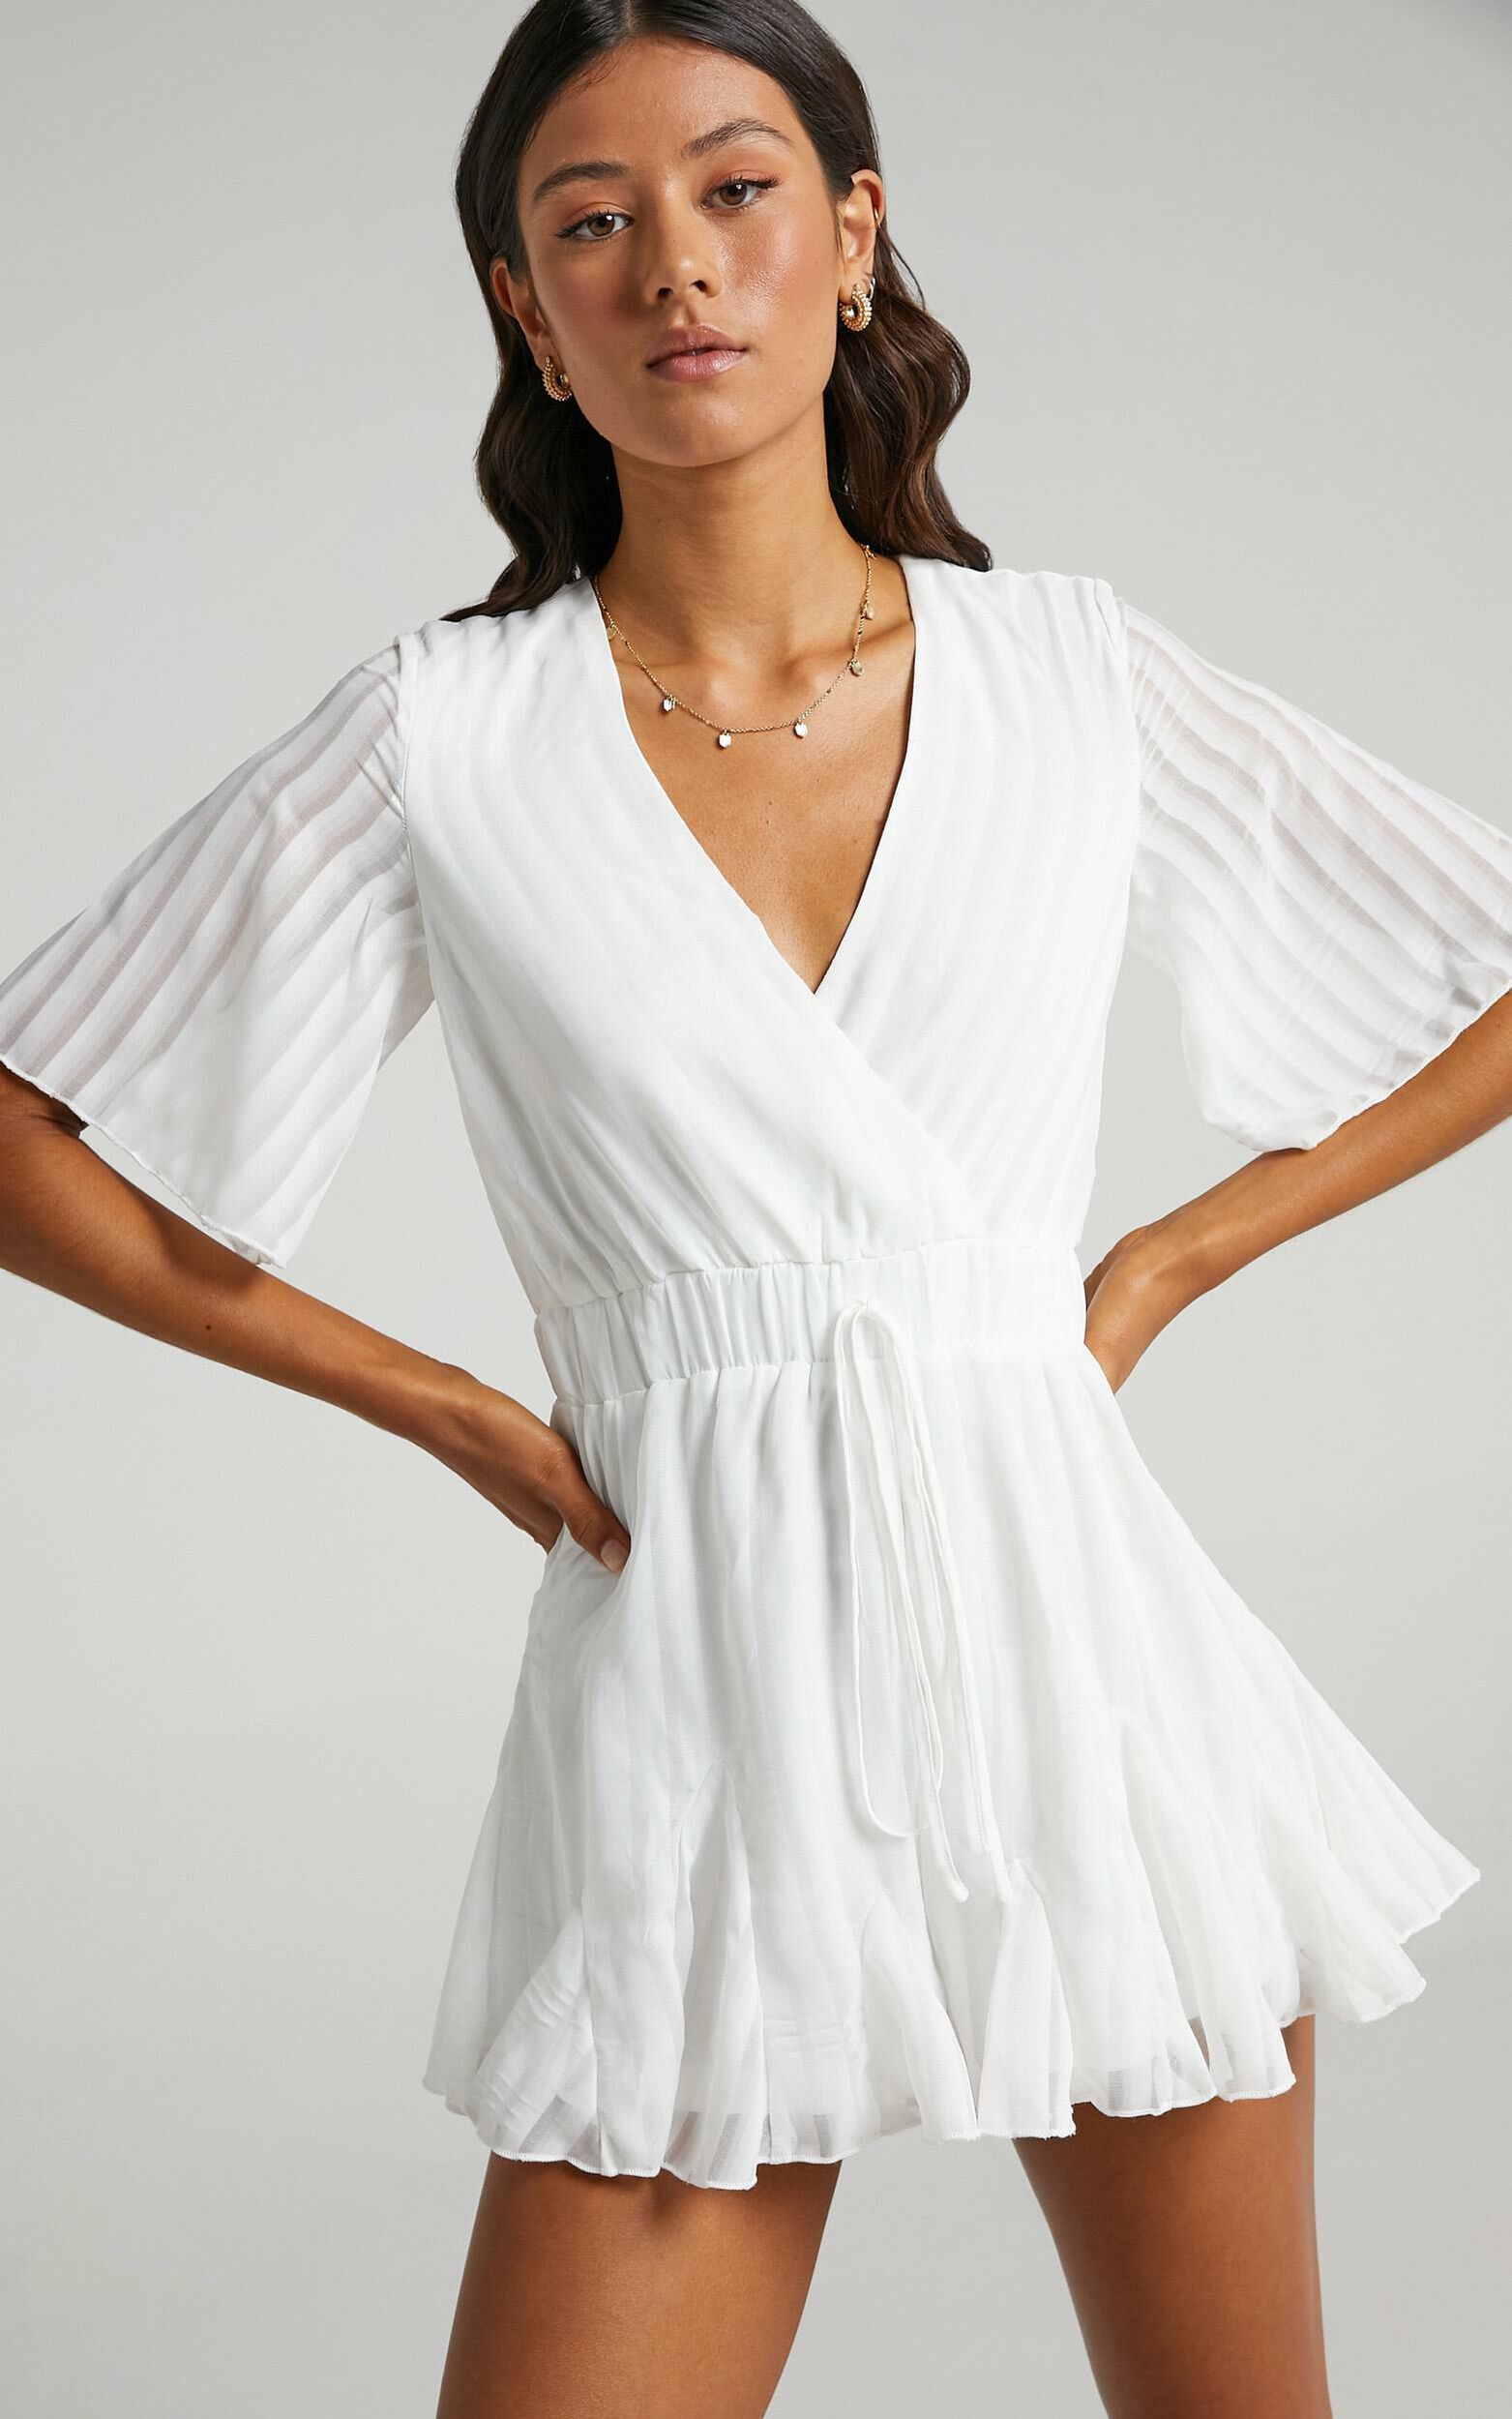 Play On My Heart Playsuit in White - 06, WHT5